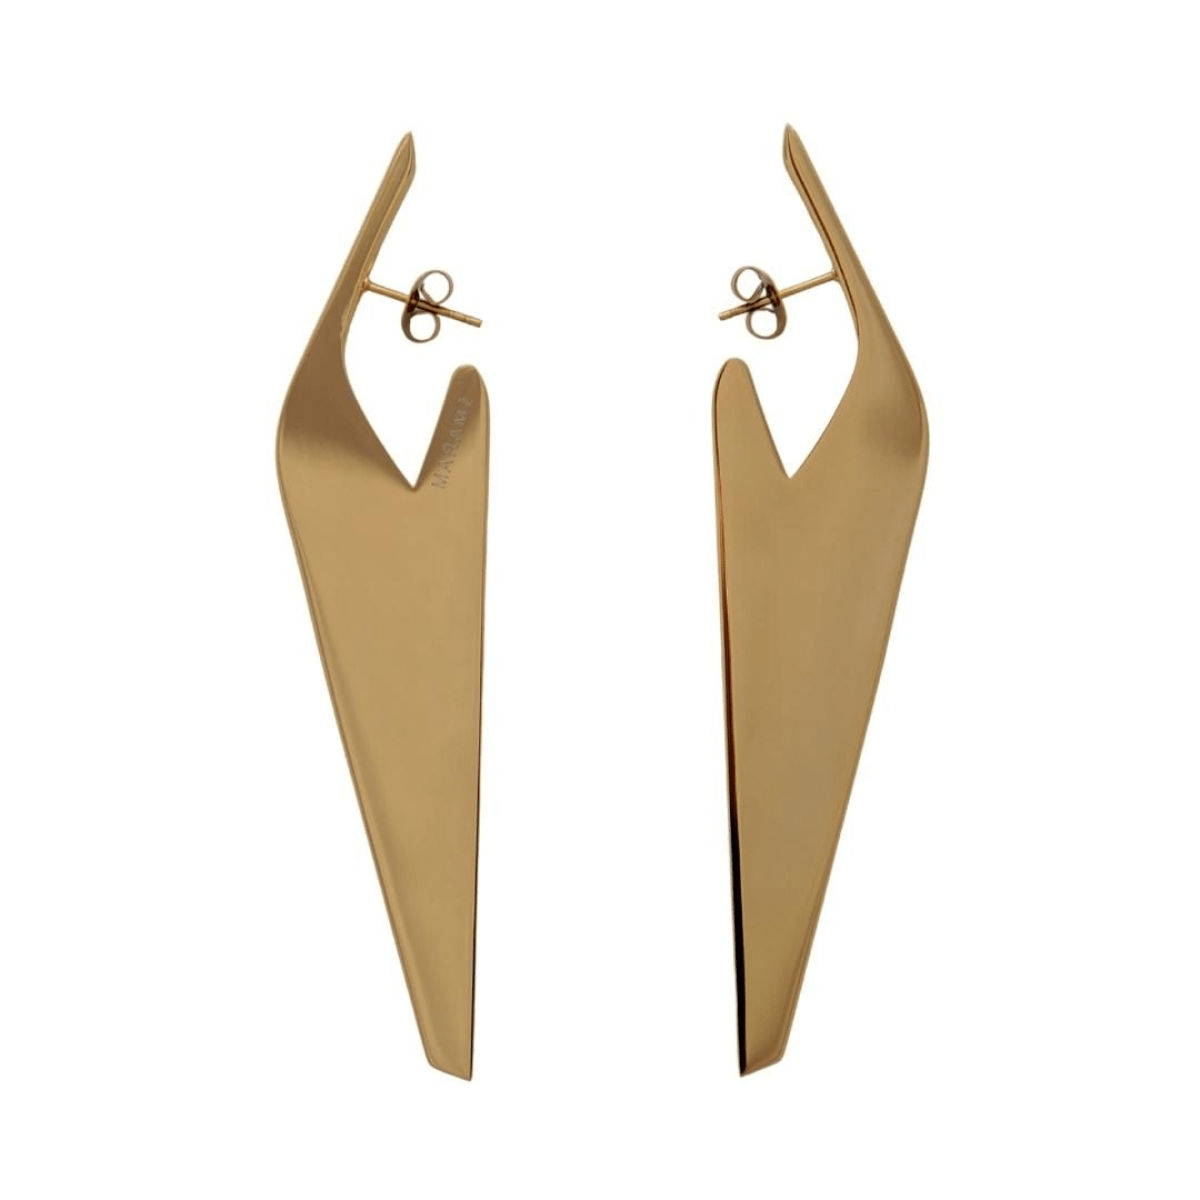 Penitents Statement Earrings in 18K Gold Plating